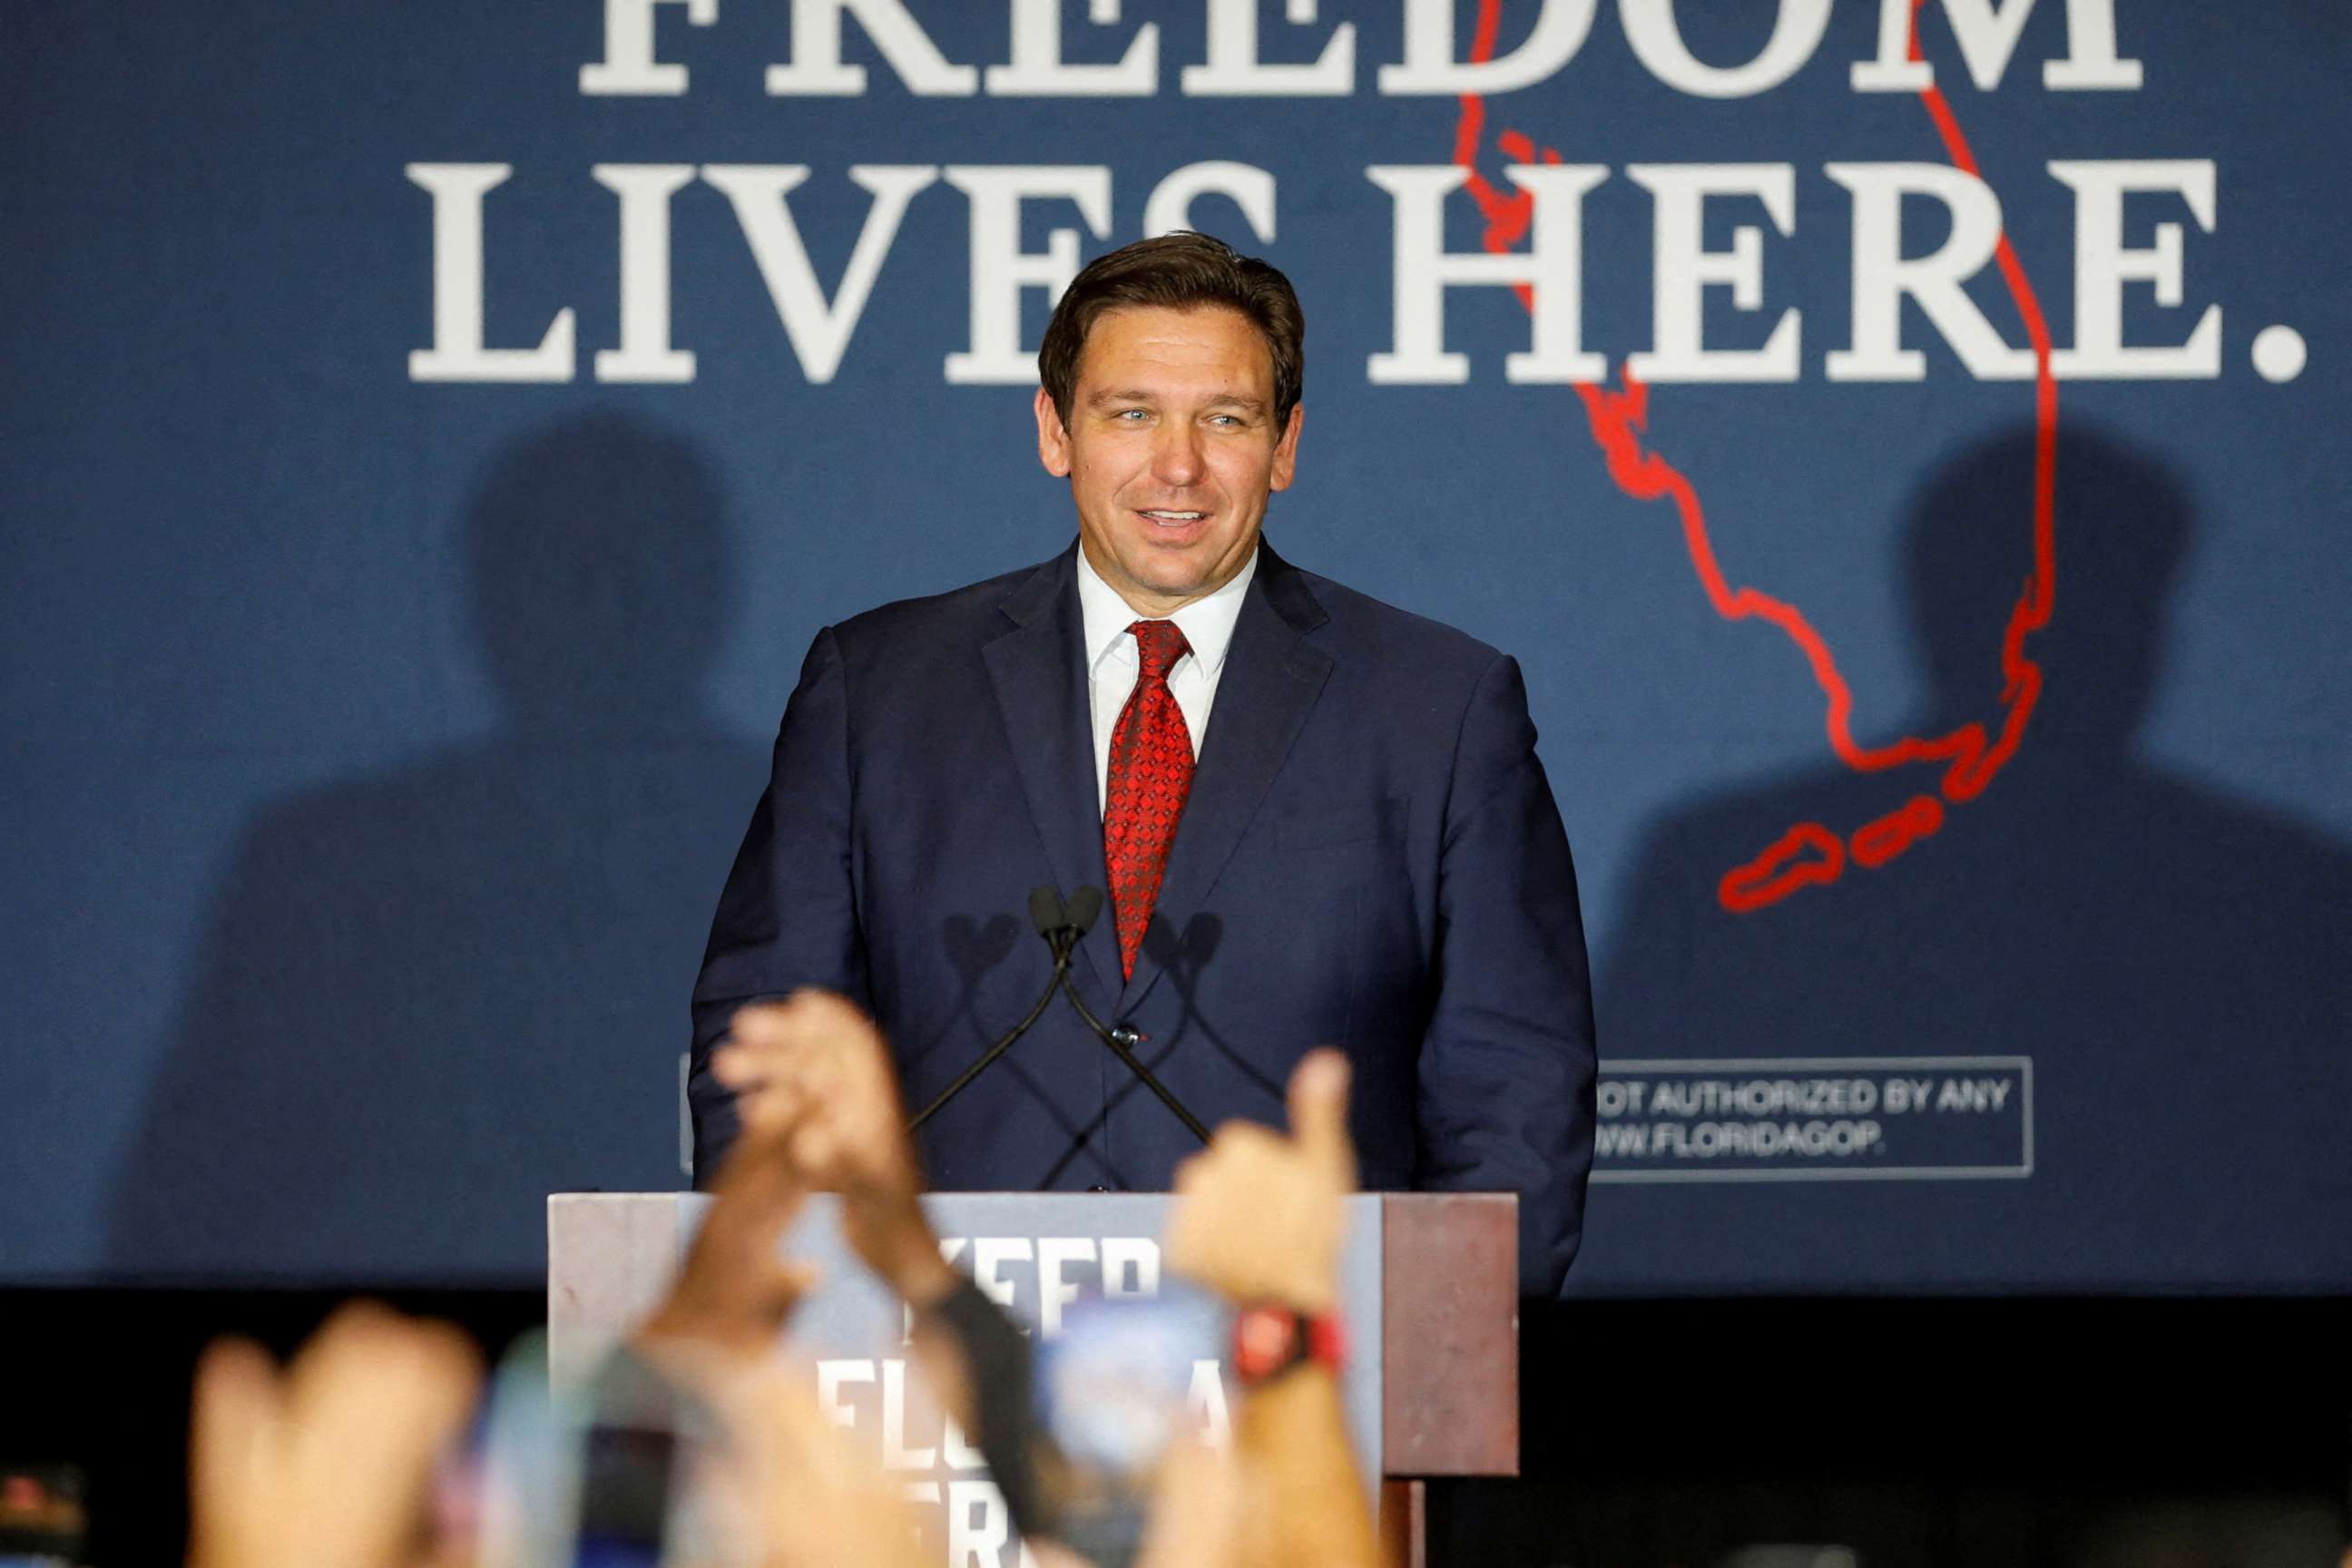 FILE PHOTO: Florida Governor Ron DeSantis speaks after the primary election for the midterms during the "Keep Florida Free Tour" at Pepinâs Hospitality Centre in Tampa, Florida, U.S., August 24, 2022.  